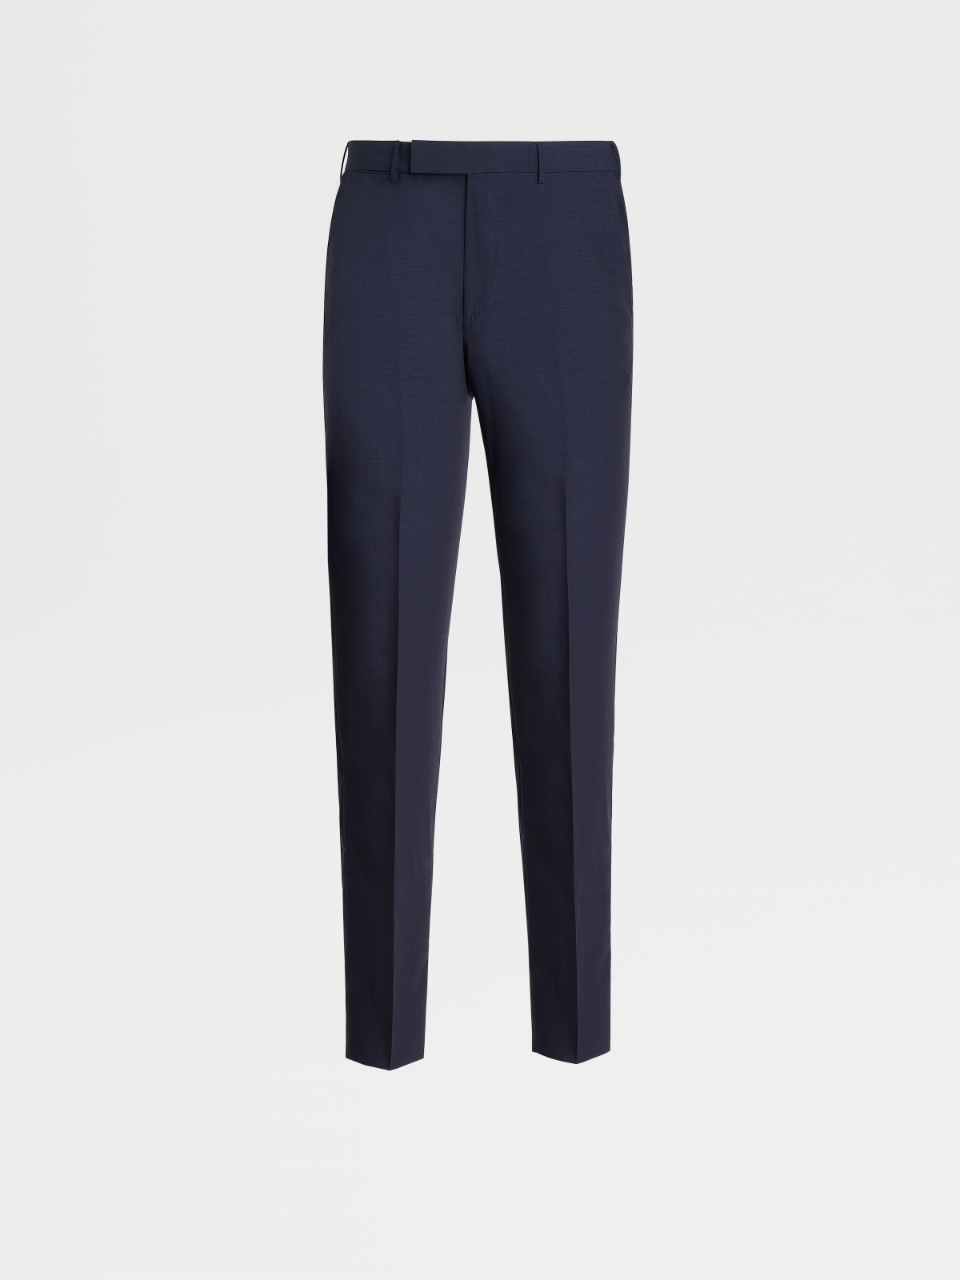 Leggerissimo Wool and Silk Flat Front Trousers